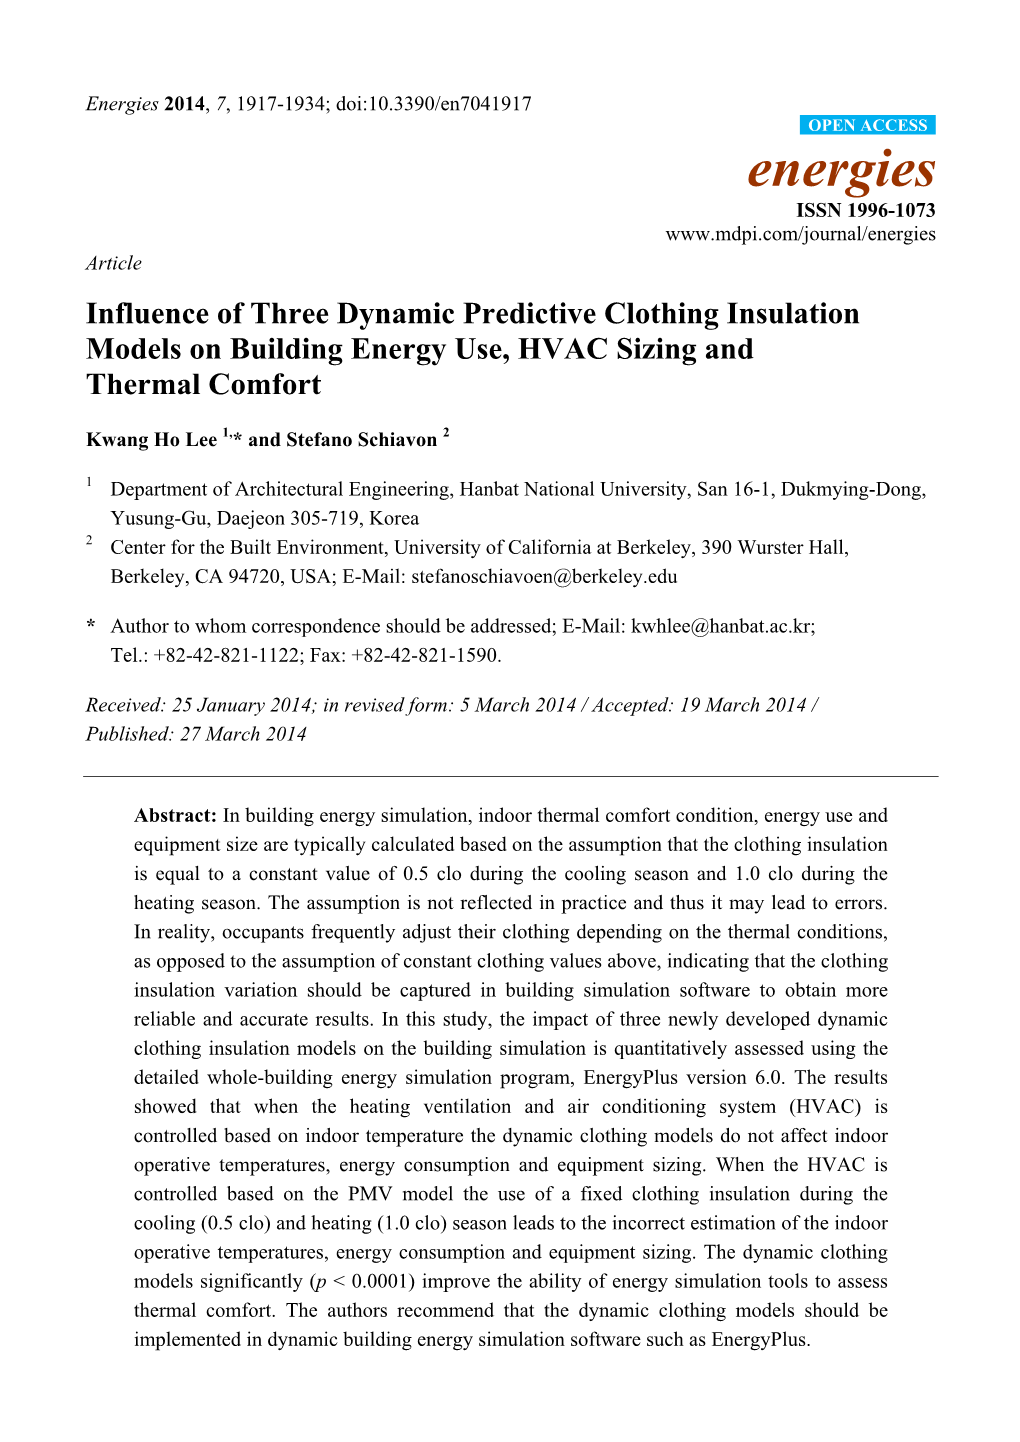 Influence of Three Dynamic Predictive Clothing Insulation Models on Building Energy Use, HVAC Sizing and Thermal Comfort